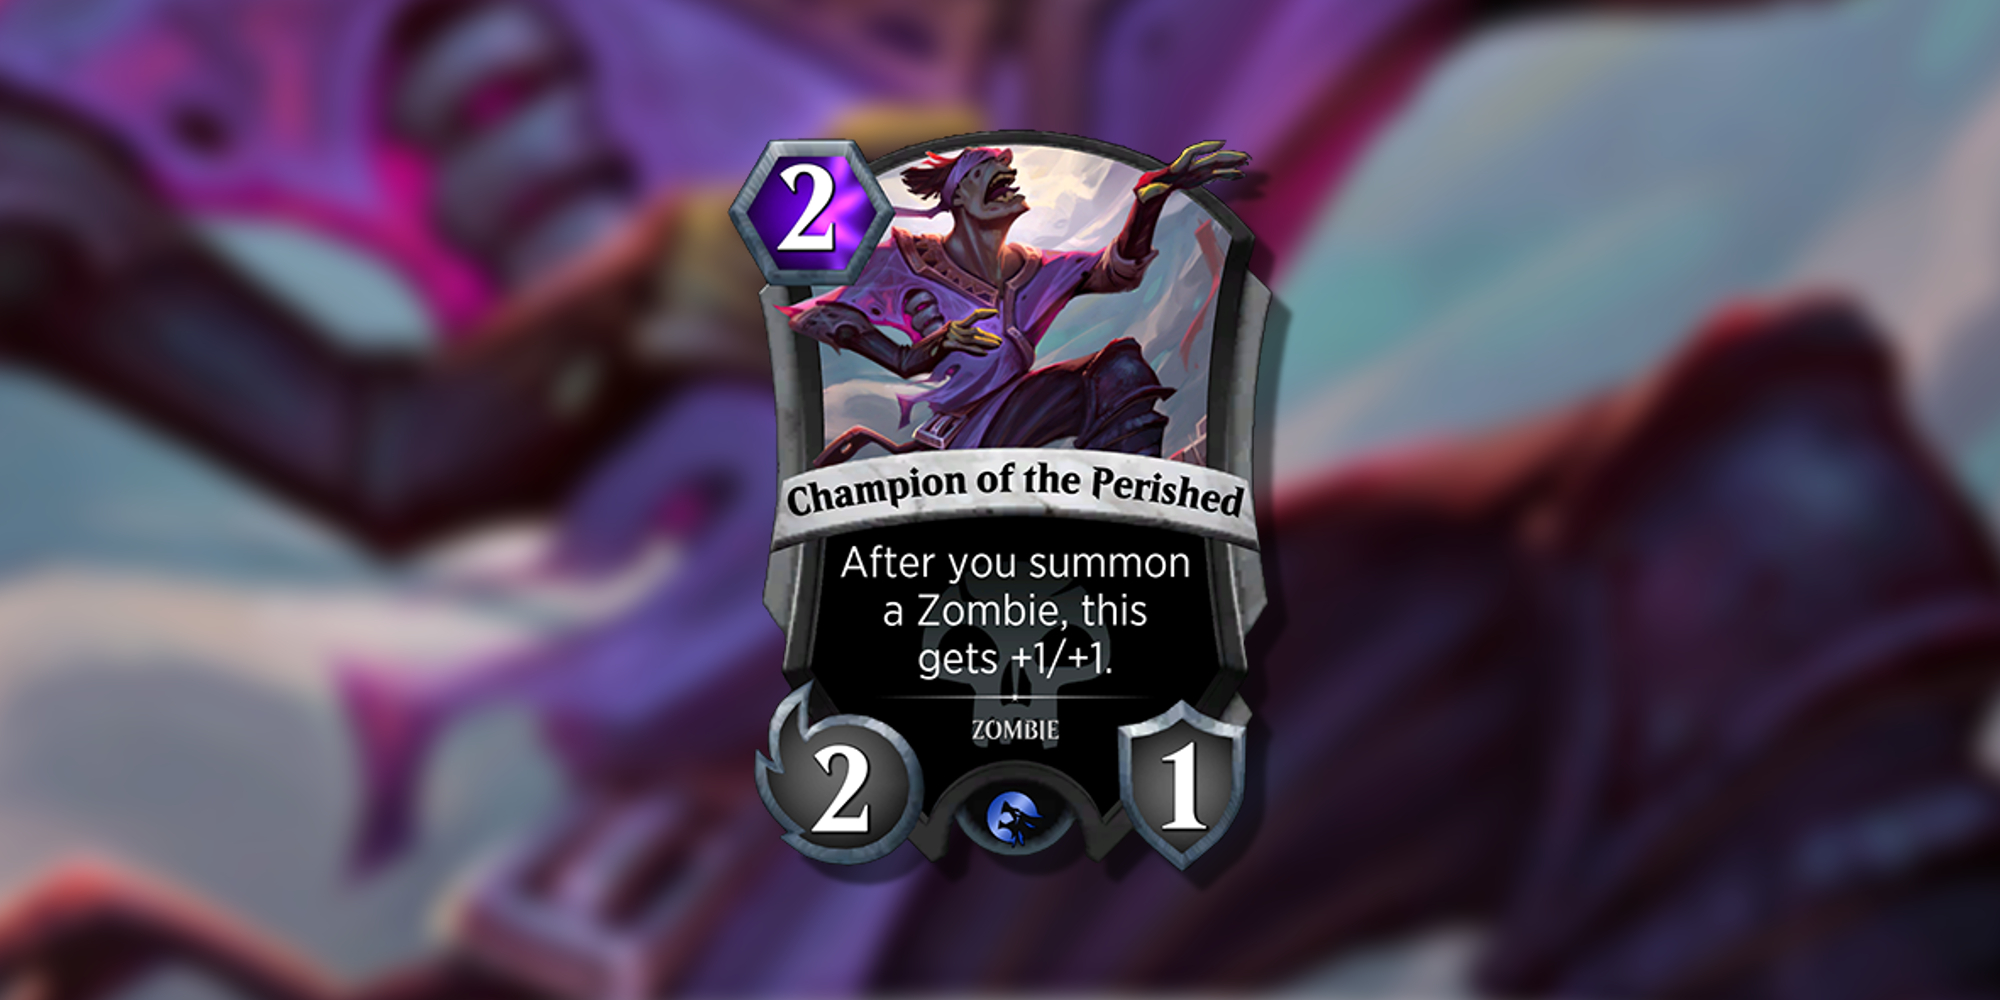 Champion of the Perished